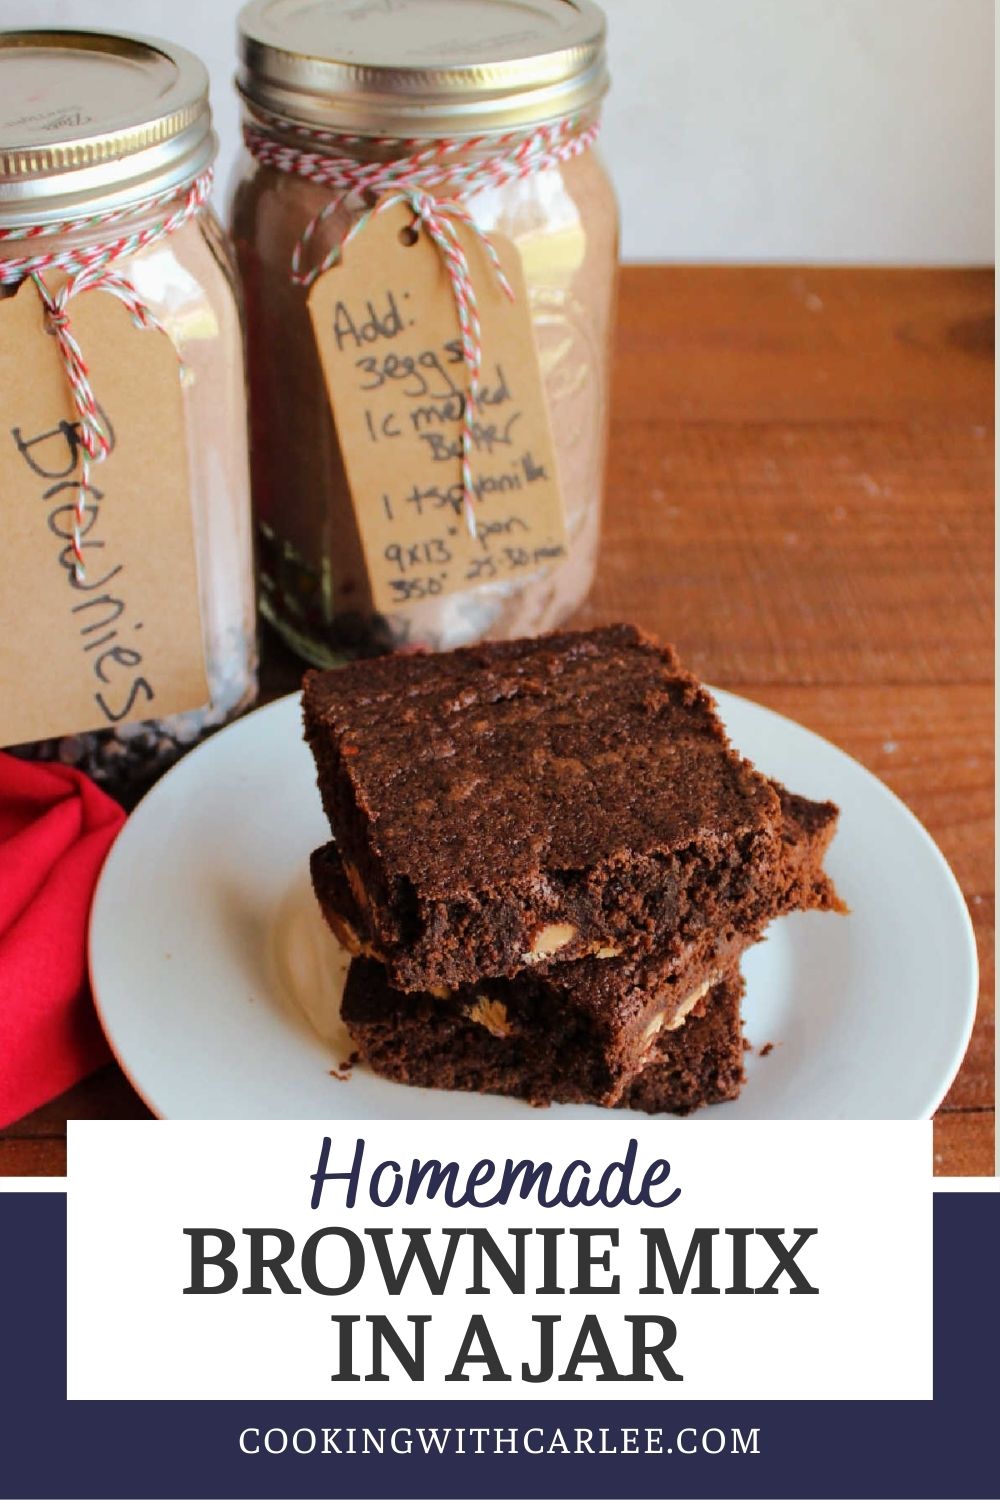 Make your own brownie mix so you can have rich fudgy homemade brownies at a moment's notice. Store the mix in glass jars or plastic bags and keep them for yourself or give them as simple gifts.